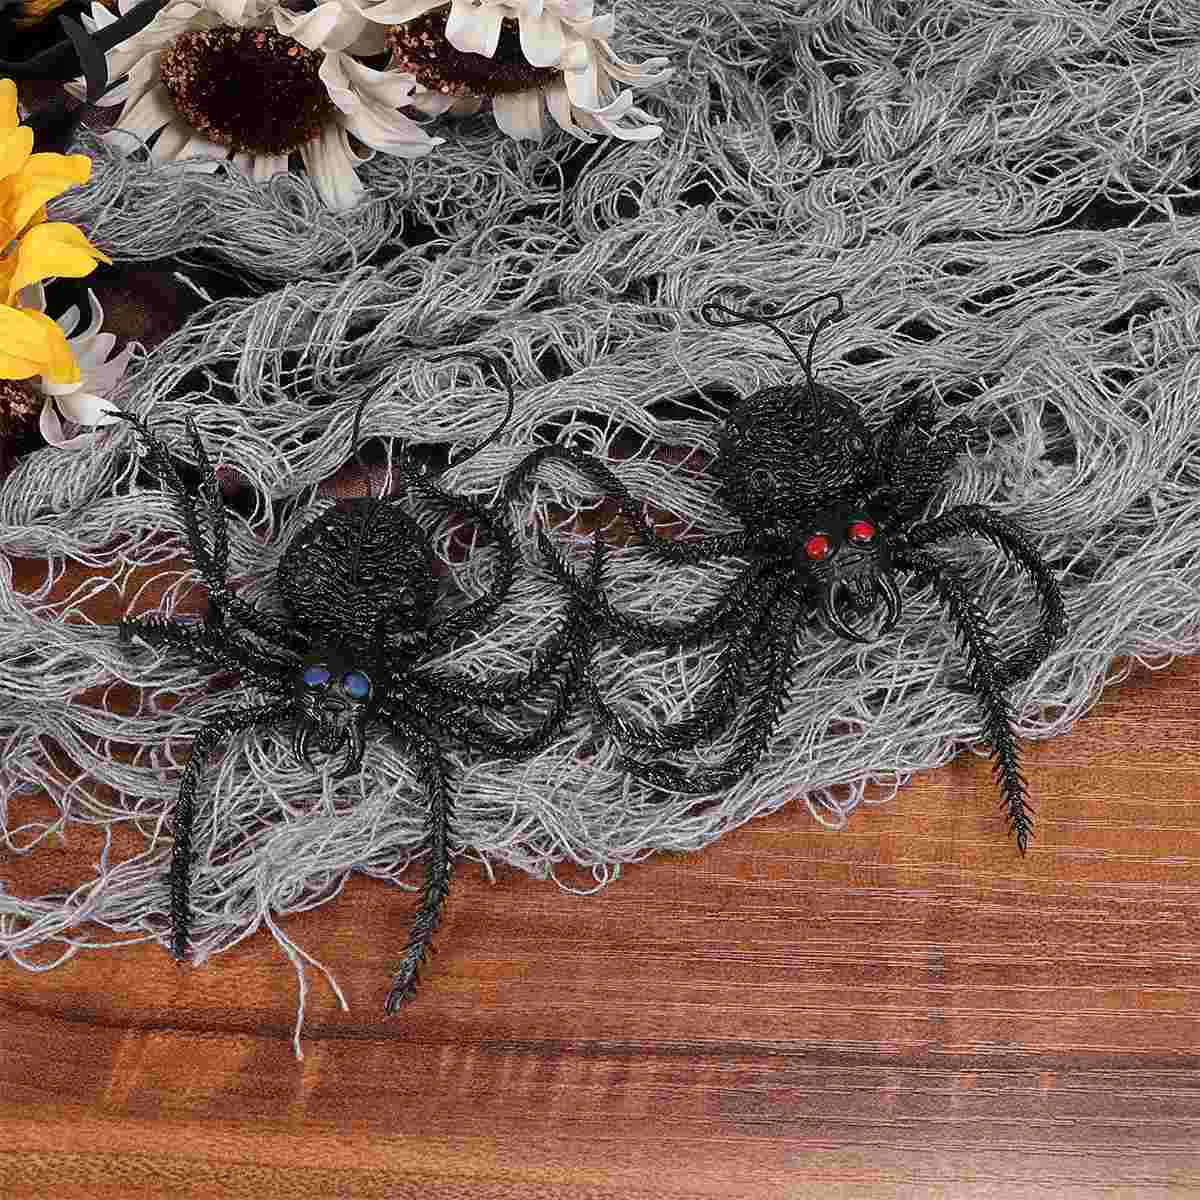 

2 Pcs Scorpion Toy Simulated Spider Fake Prop Funny Tricky Toys Halloween Artificial Insect Plastic Spiders